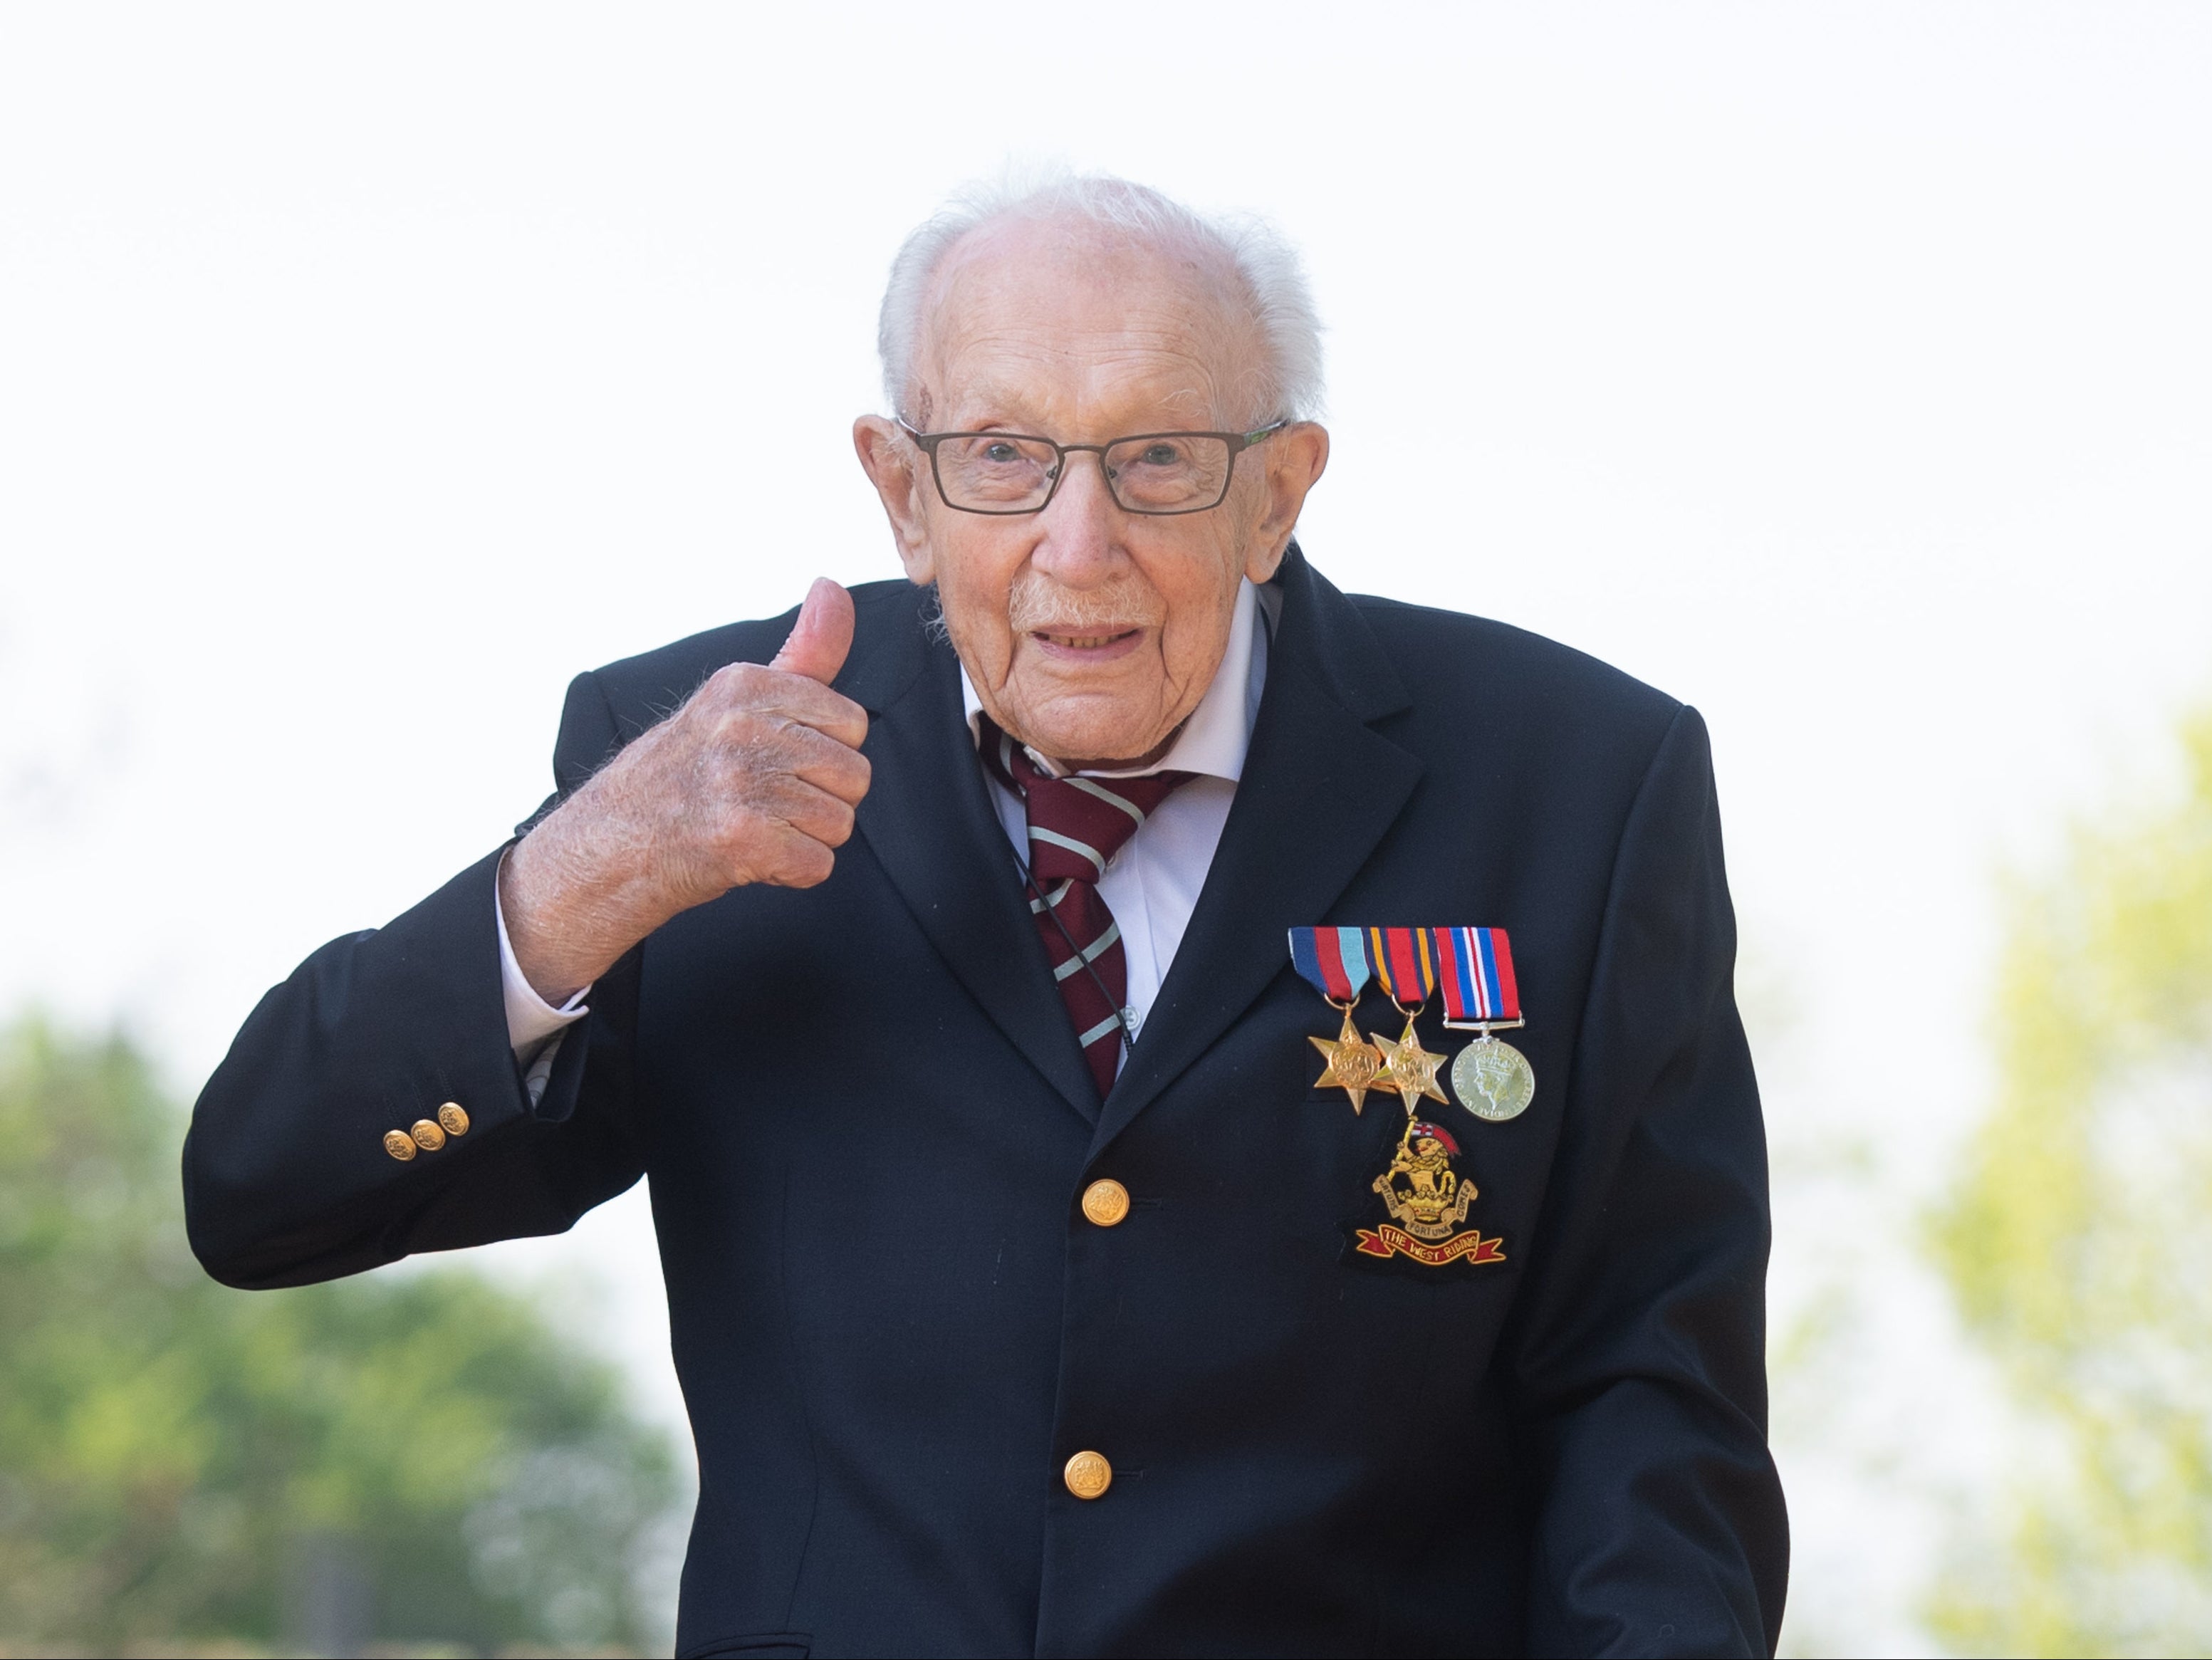 Captain Sir Tom Moore died at the age of 100 after contracting coronavirus